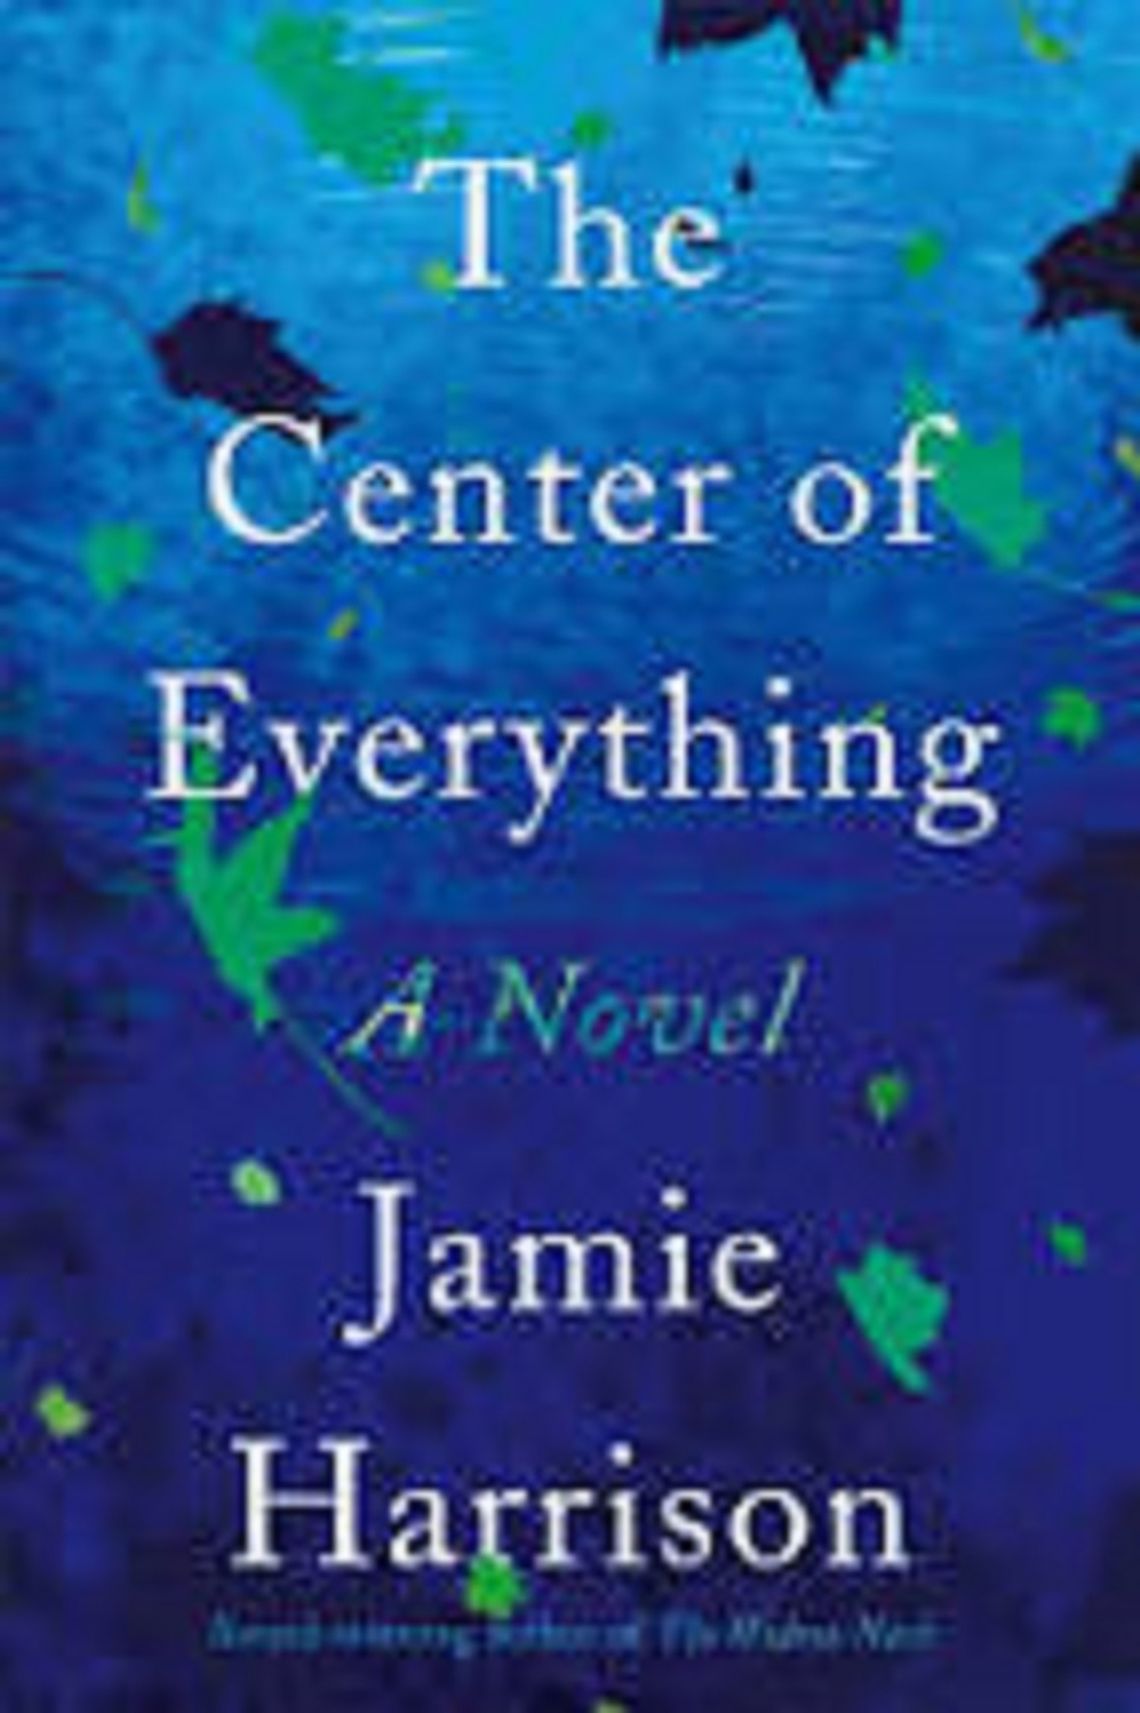 The Center of Everything: A Novel by Jamie Harrison